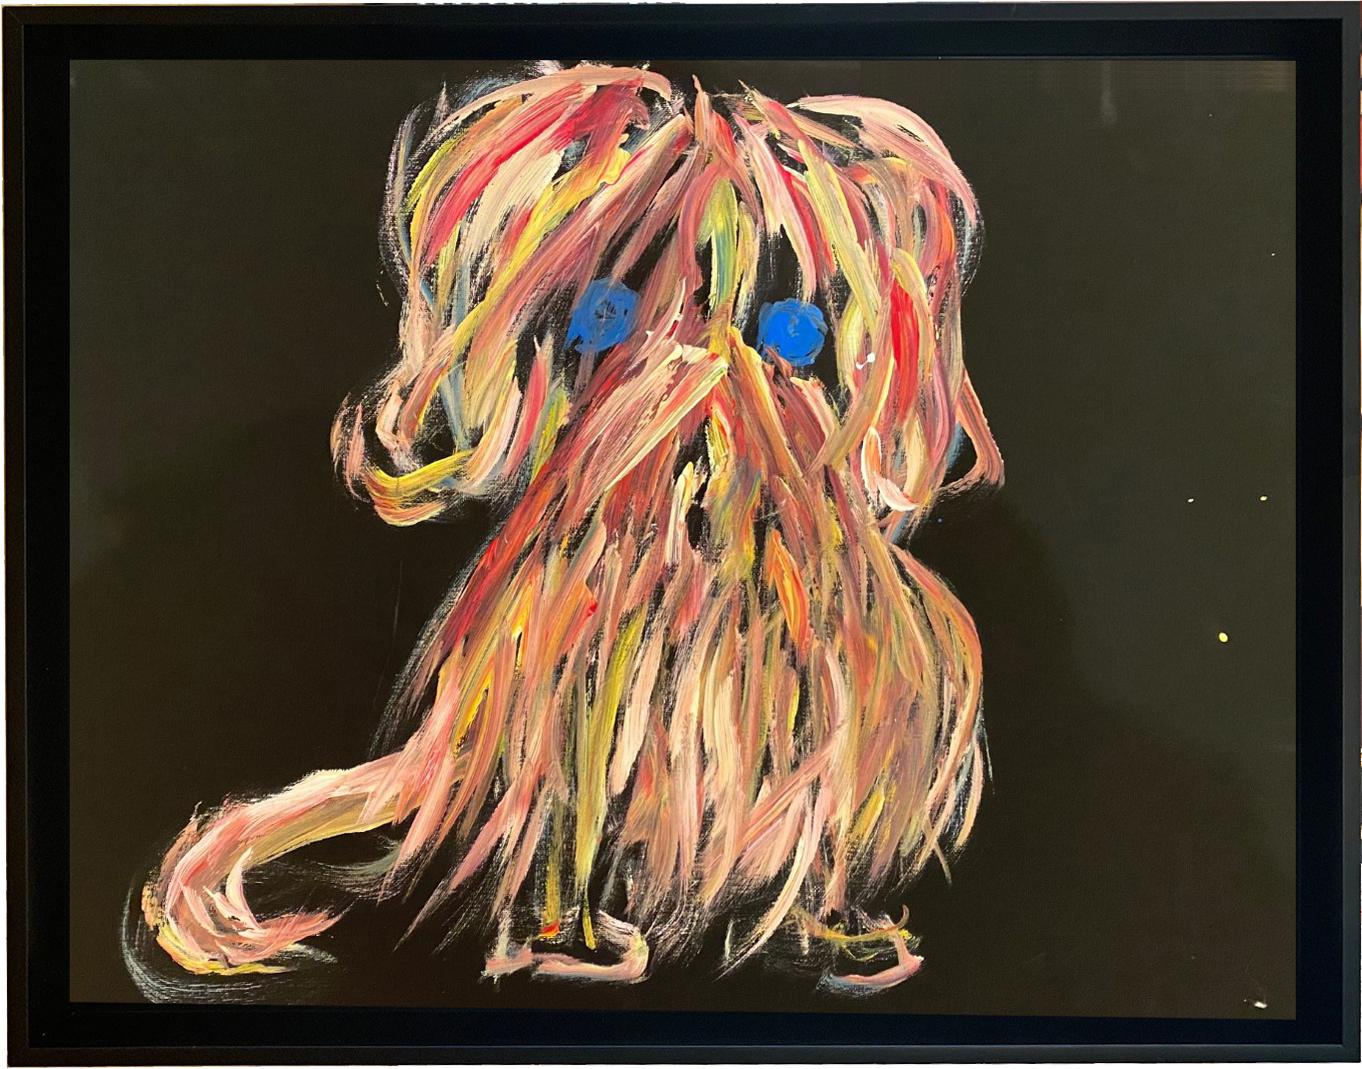 'The Curious Creature' Acrylic On Canvas Original 2021 Painting Contemporary Art